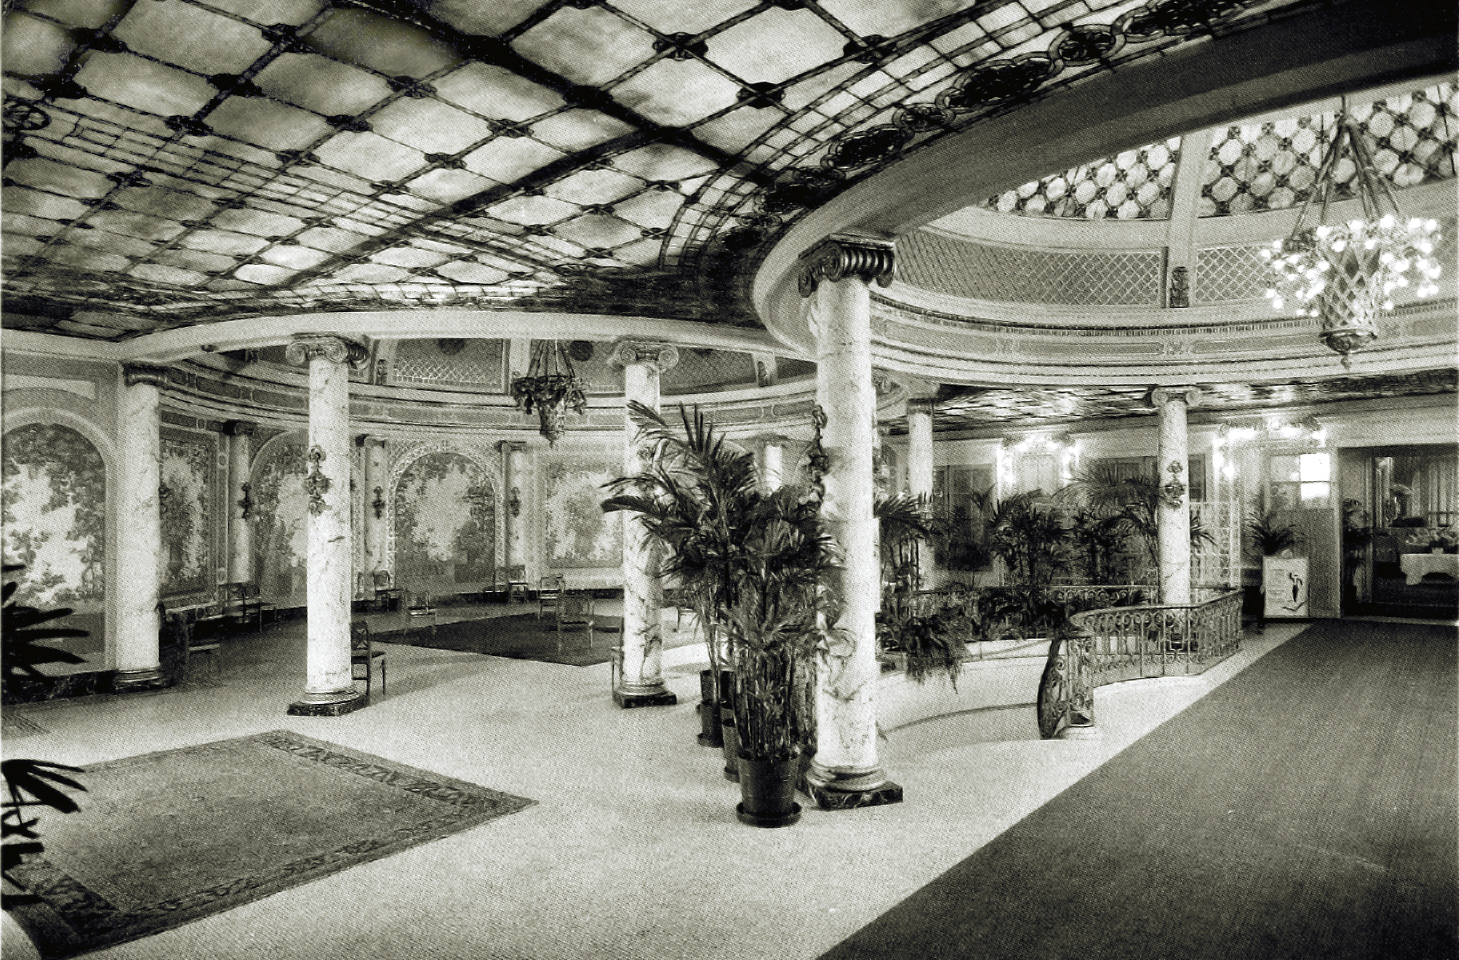 A historic photo showing the interior atrium of the hotel.